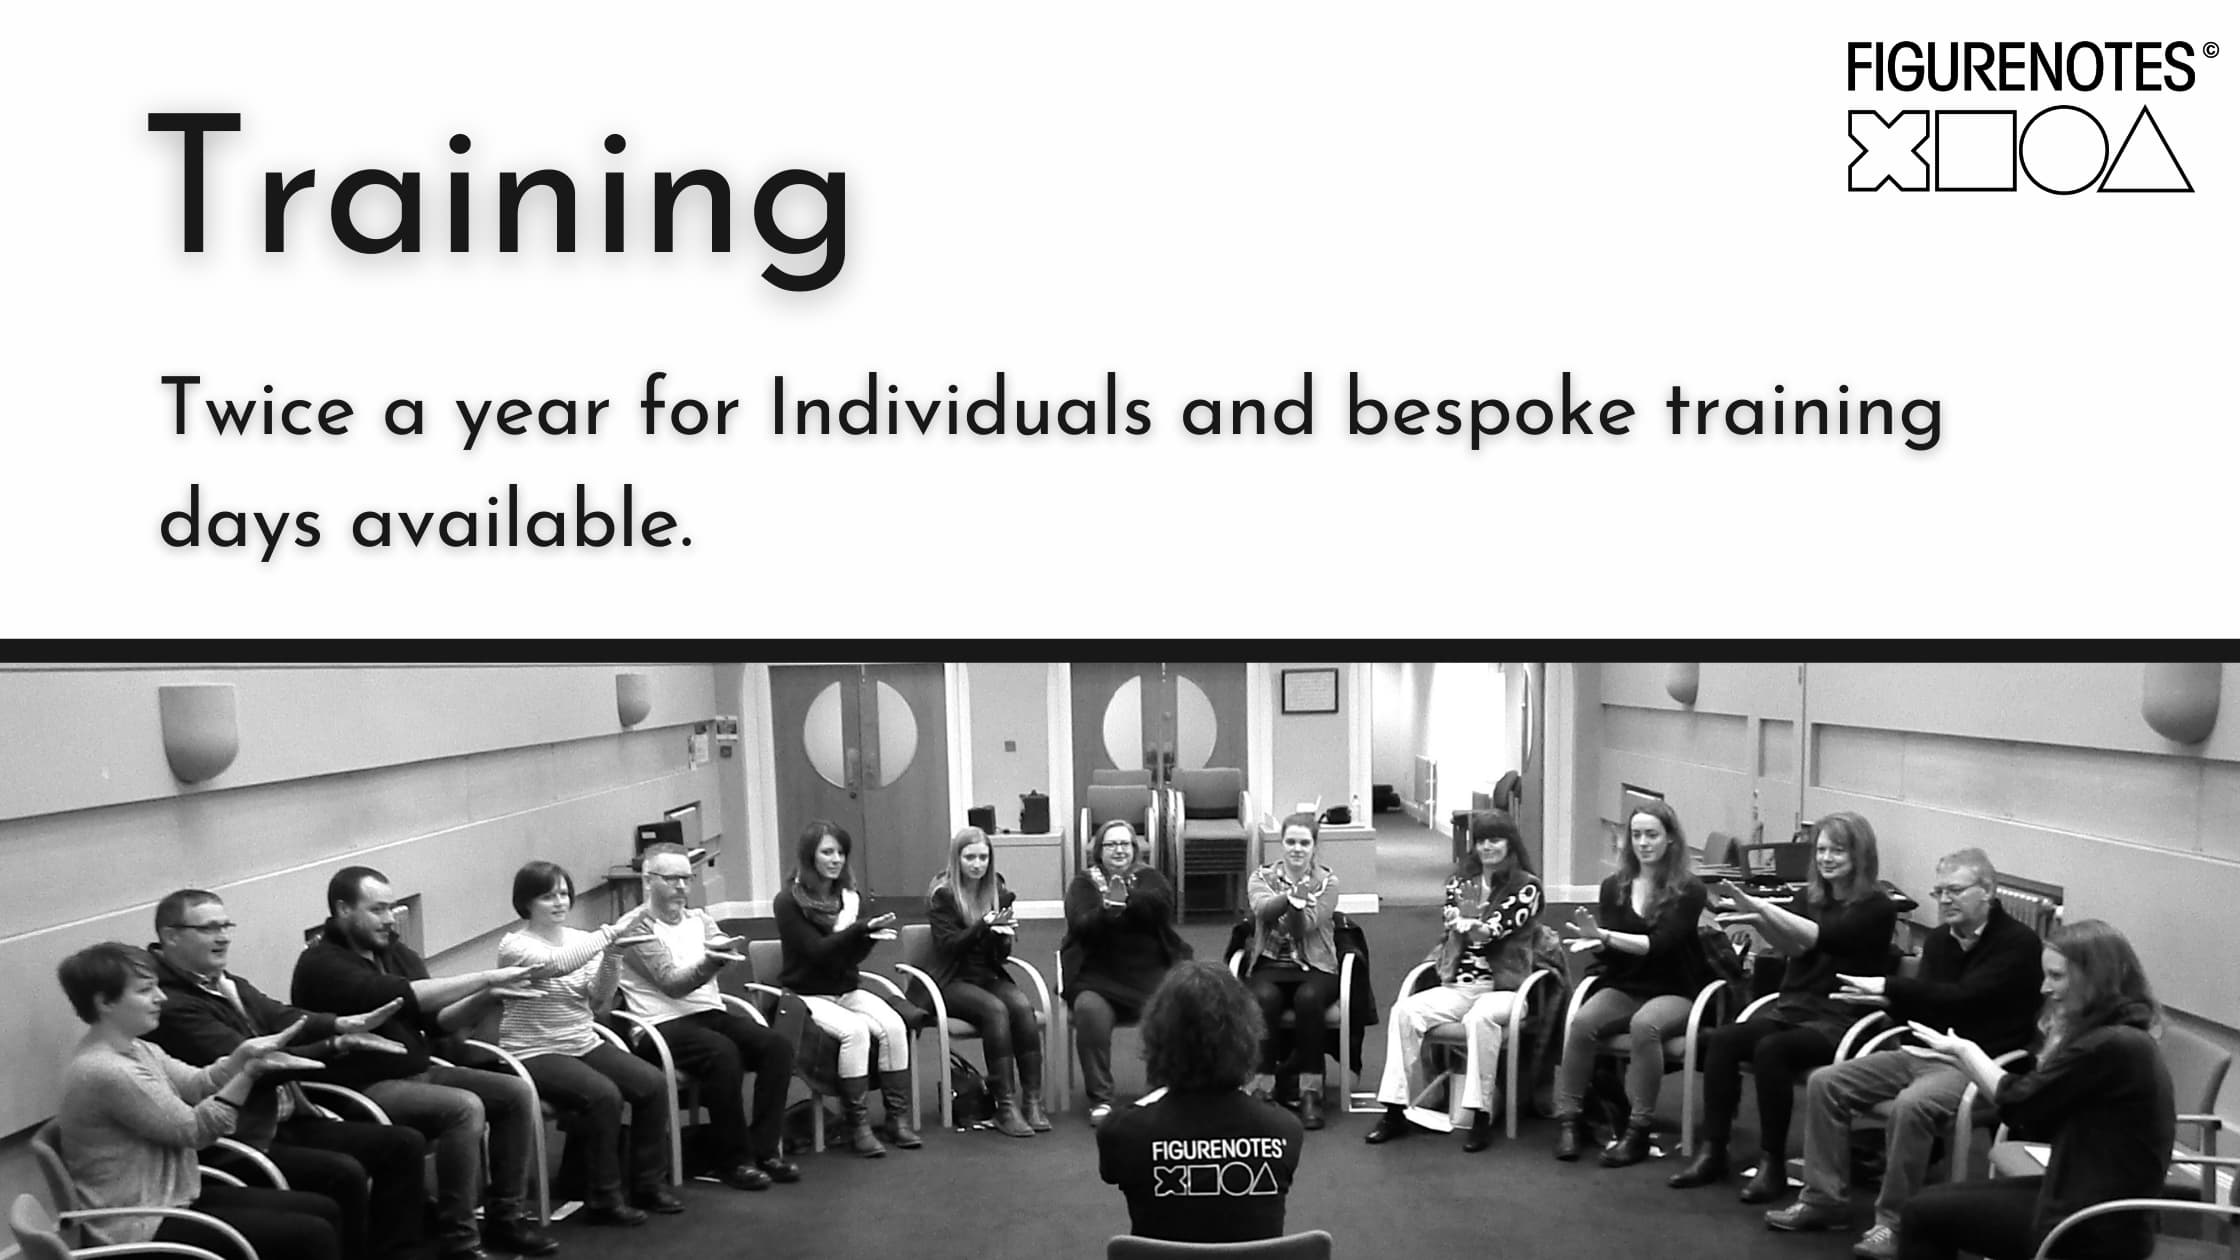 Training twice a year for individuals and bespoke training